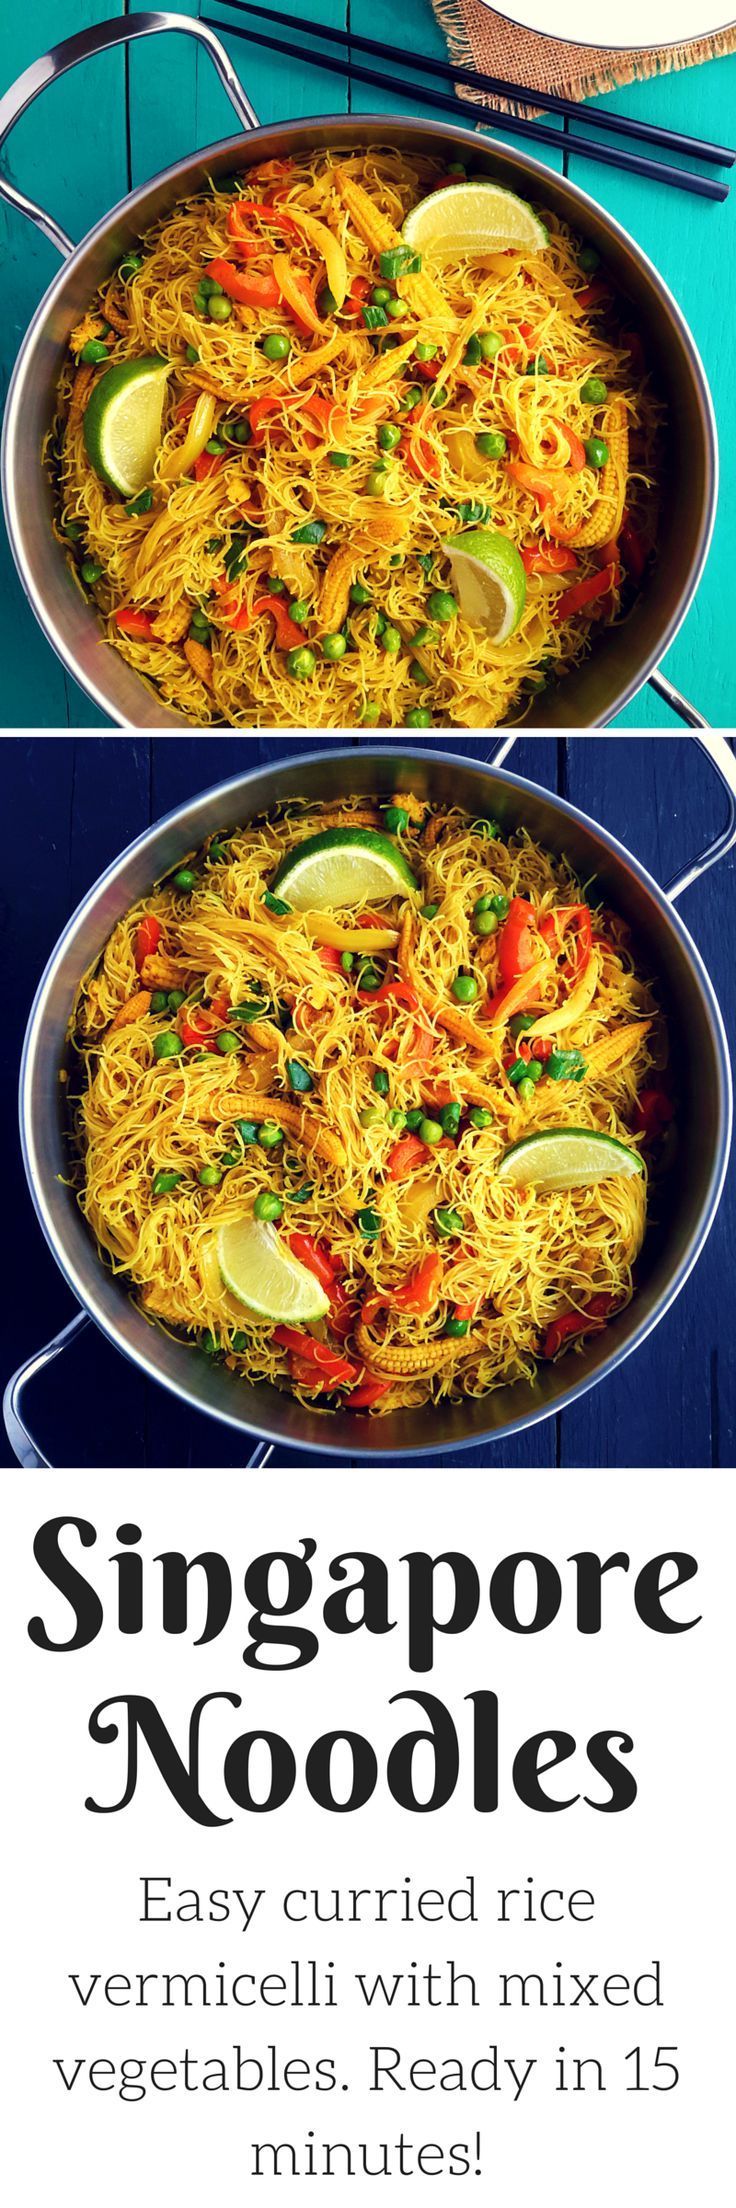 Singapore noodles are a great vegetarian/vegan lunch or dinner ready in an instant! Curried rice vermi